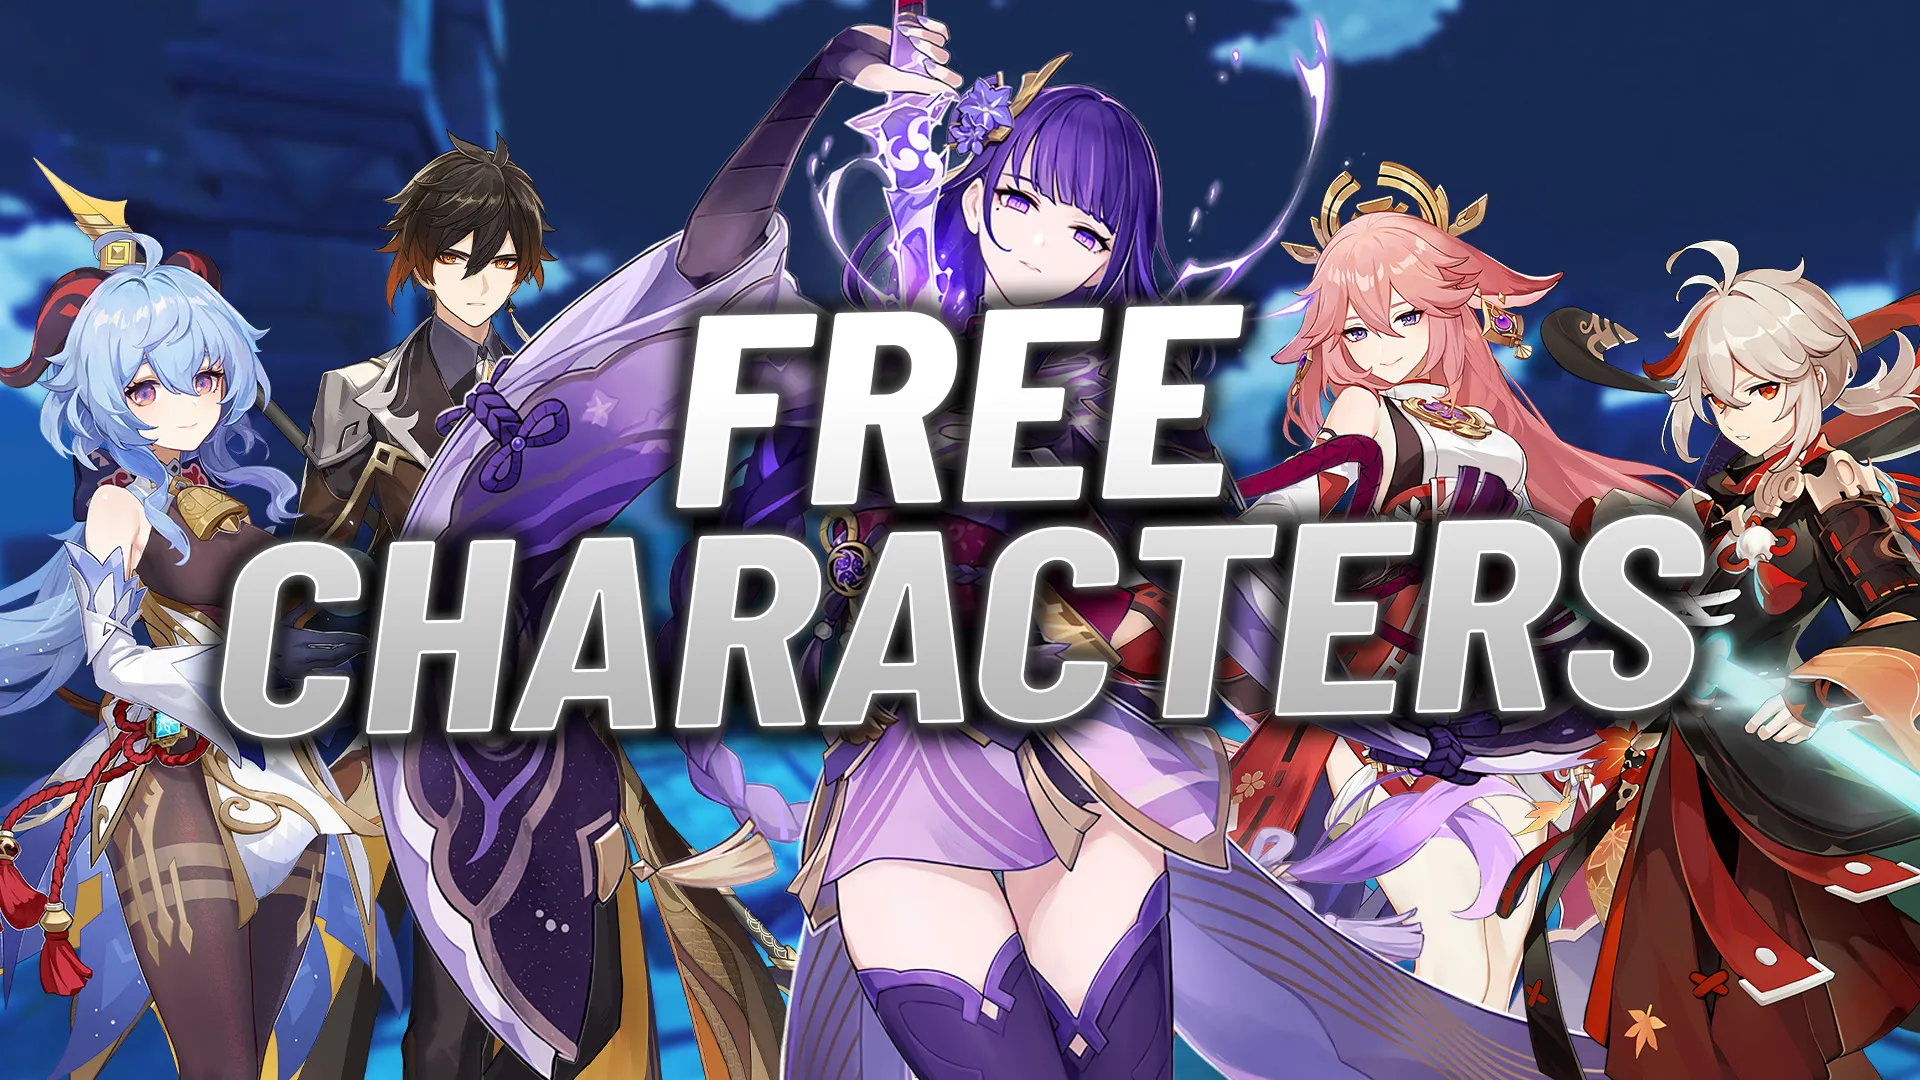 Genshin Impact Free Characters Guide - How to Get Six Free Characters